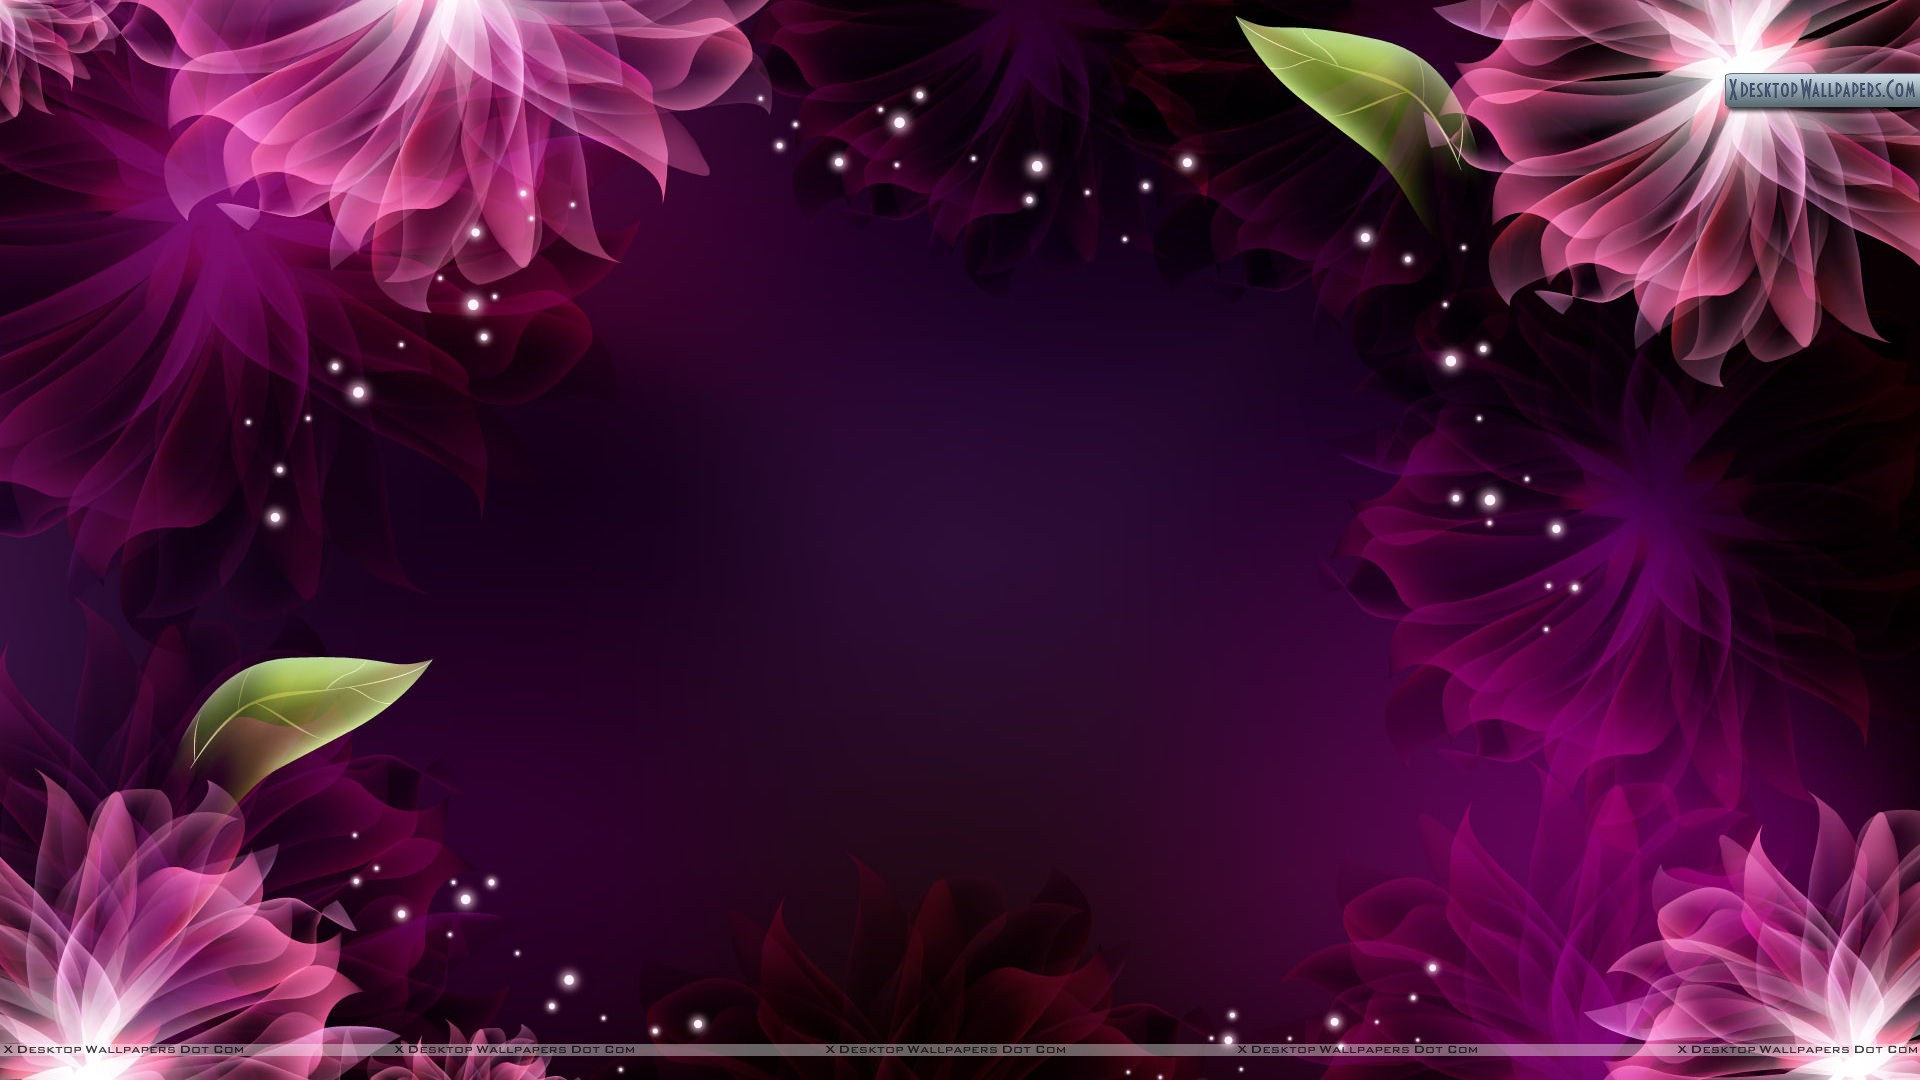 Abstract Flower Backgrounds Hd Wallpaper Background   HD Wallpapers 1920x1080